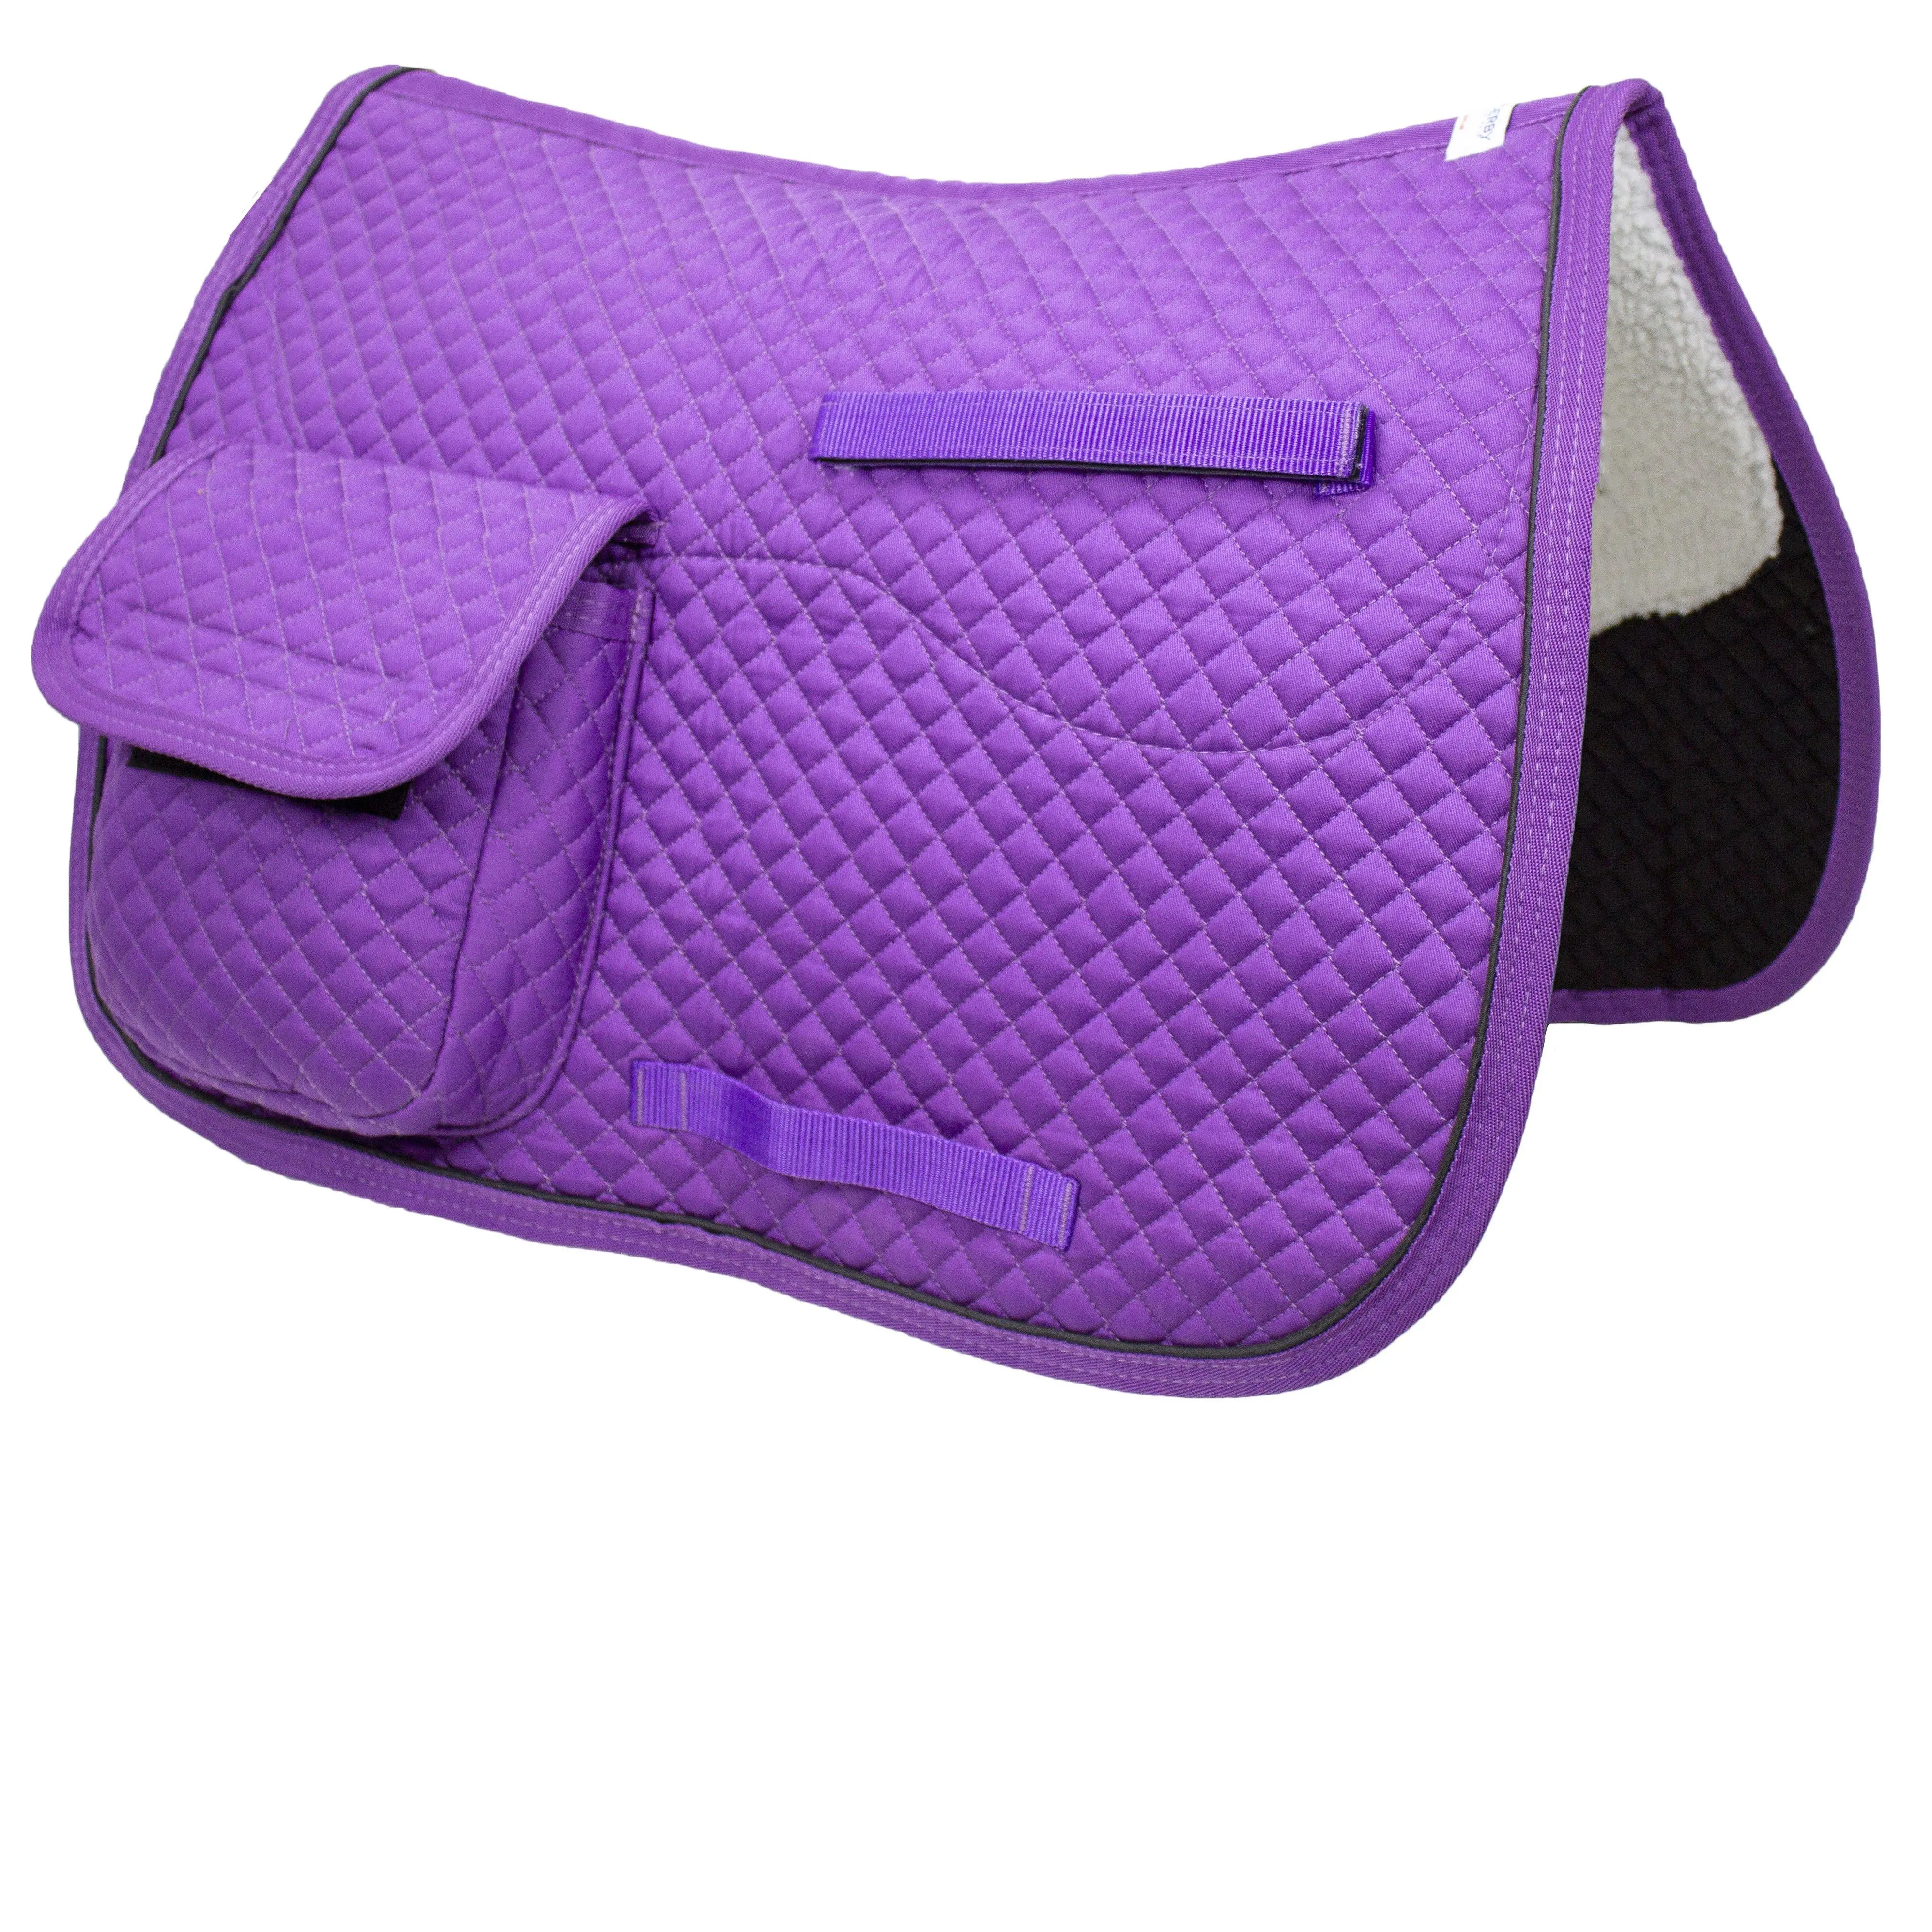 English Equestrian Multi Color Poly-Cotton Material Fabric Padded Horse Saddle Pad With Pockets